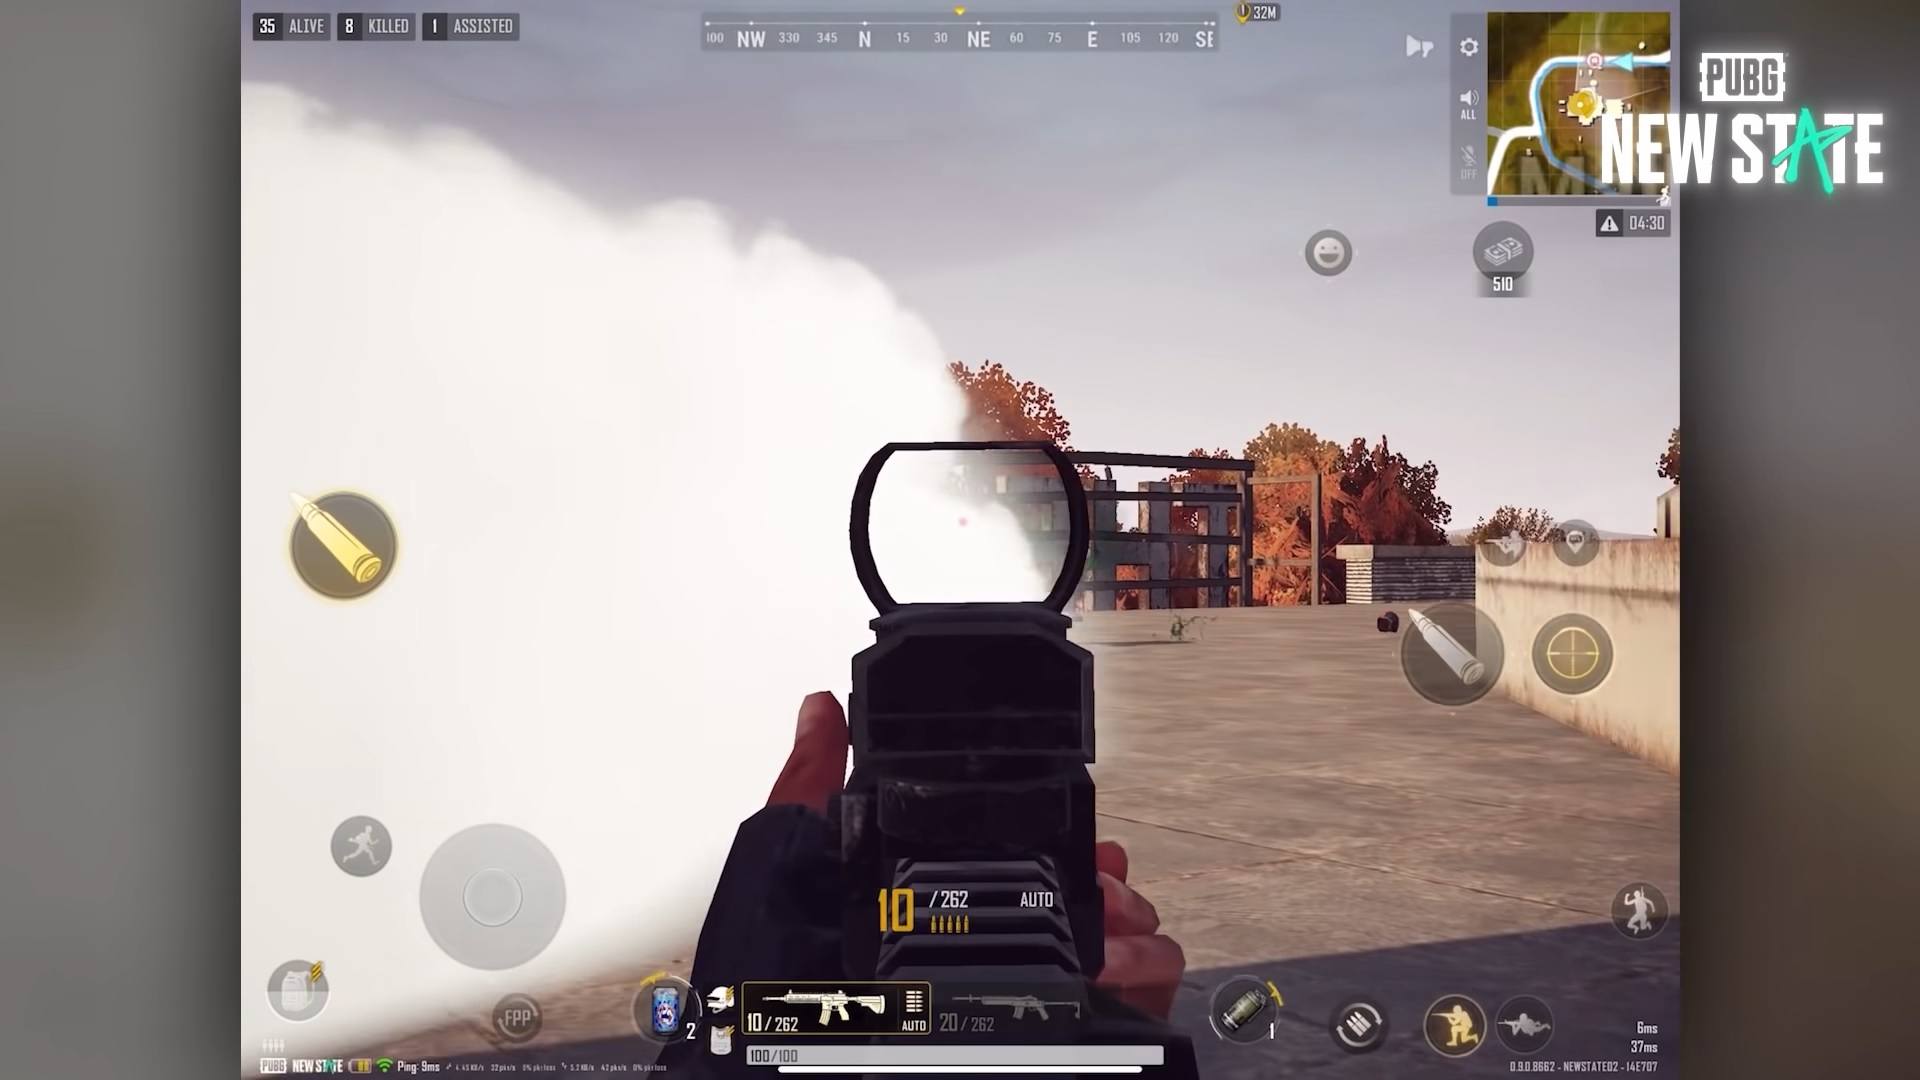 PUBG: New State Assault Rifle Guide - Learn How to Use Your Rifles